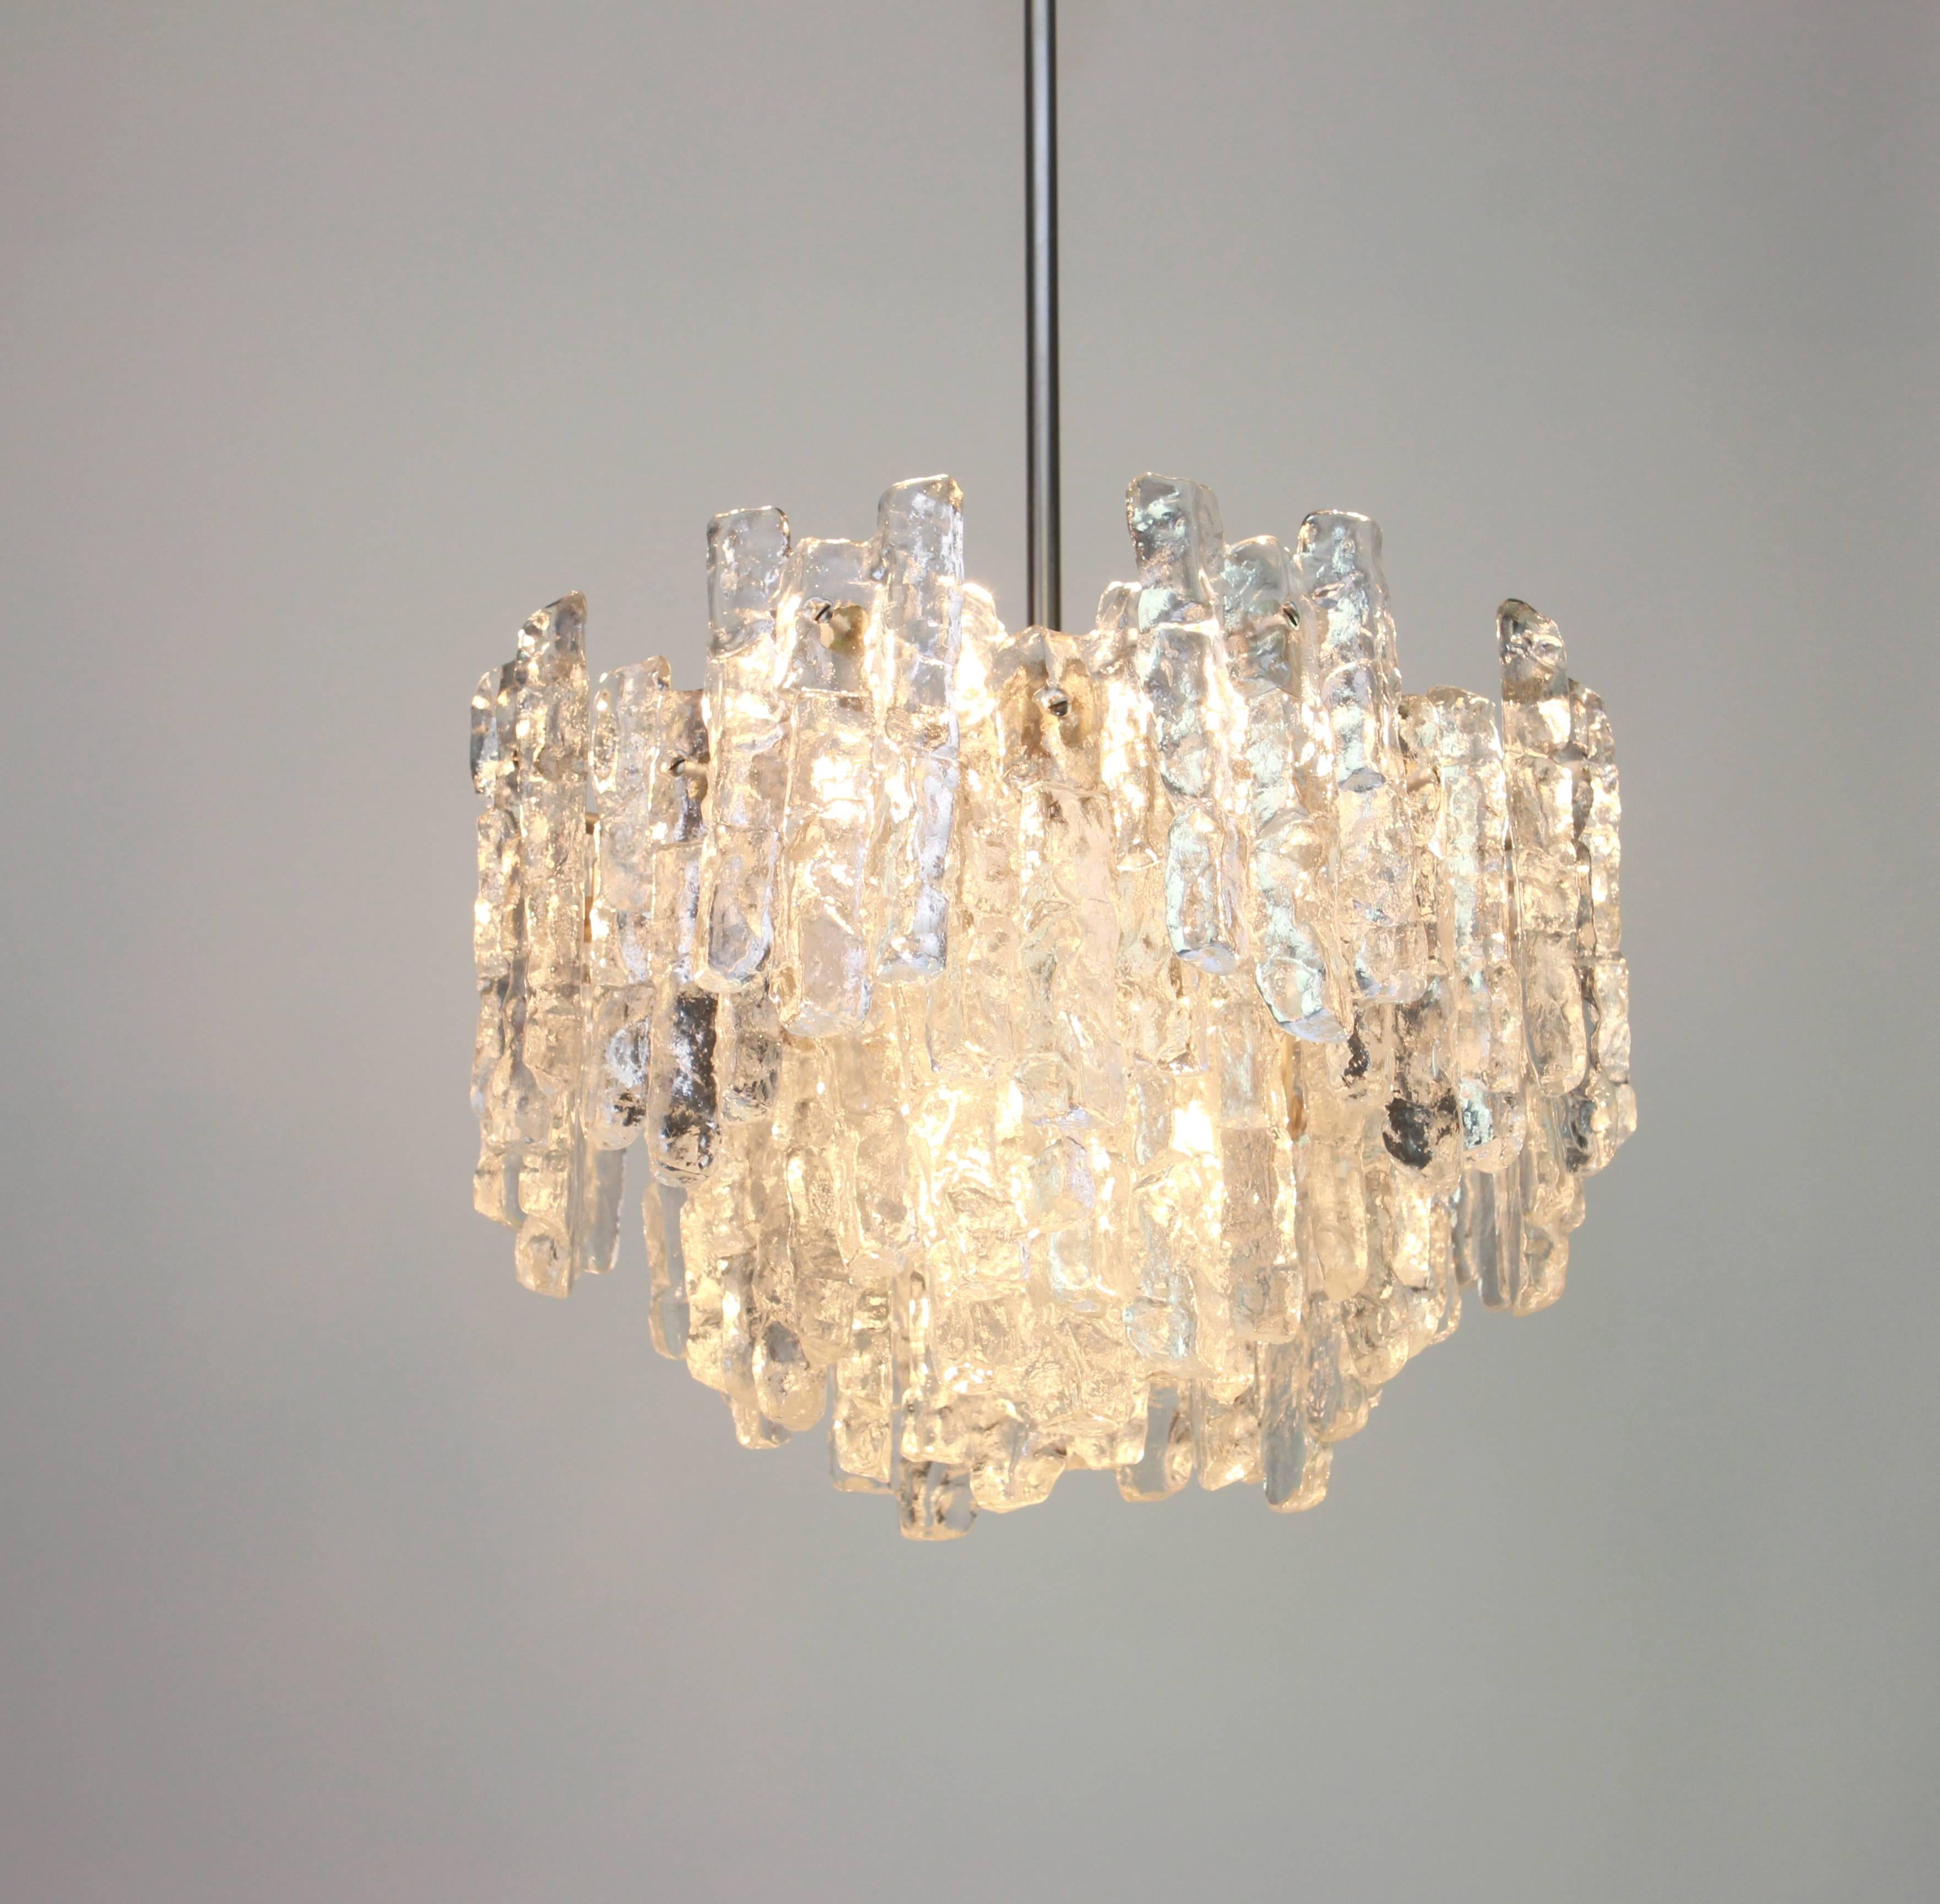 1 of 4 Large Murano Ice Glass Chandelier by Kalmar, Austria, 1960s For Sale 3